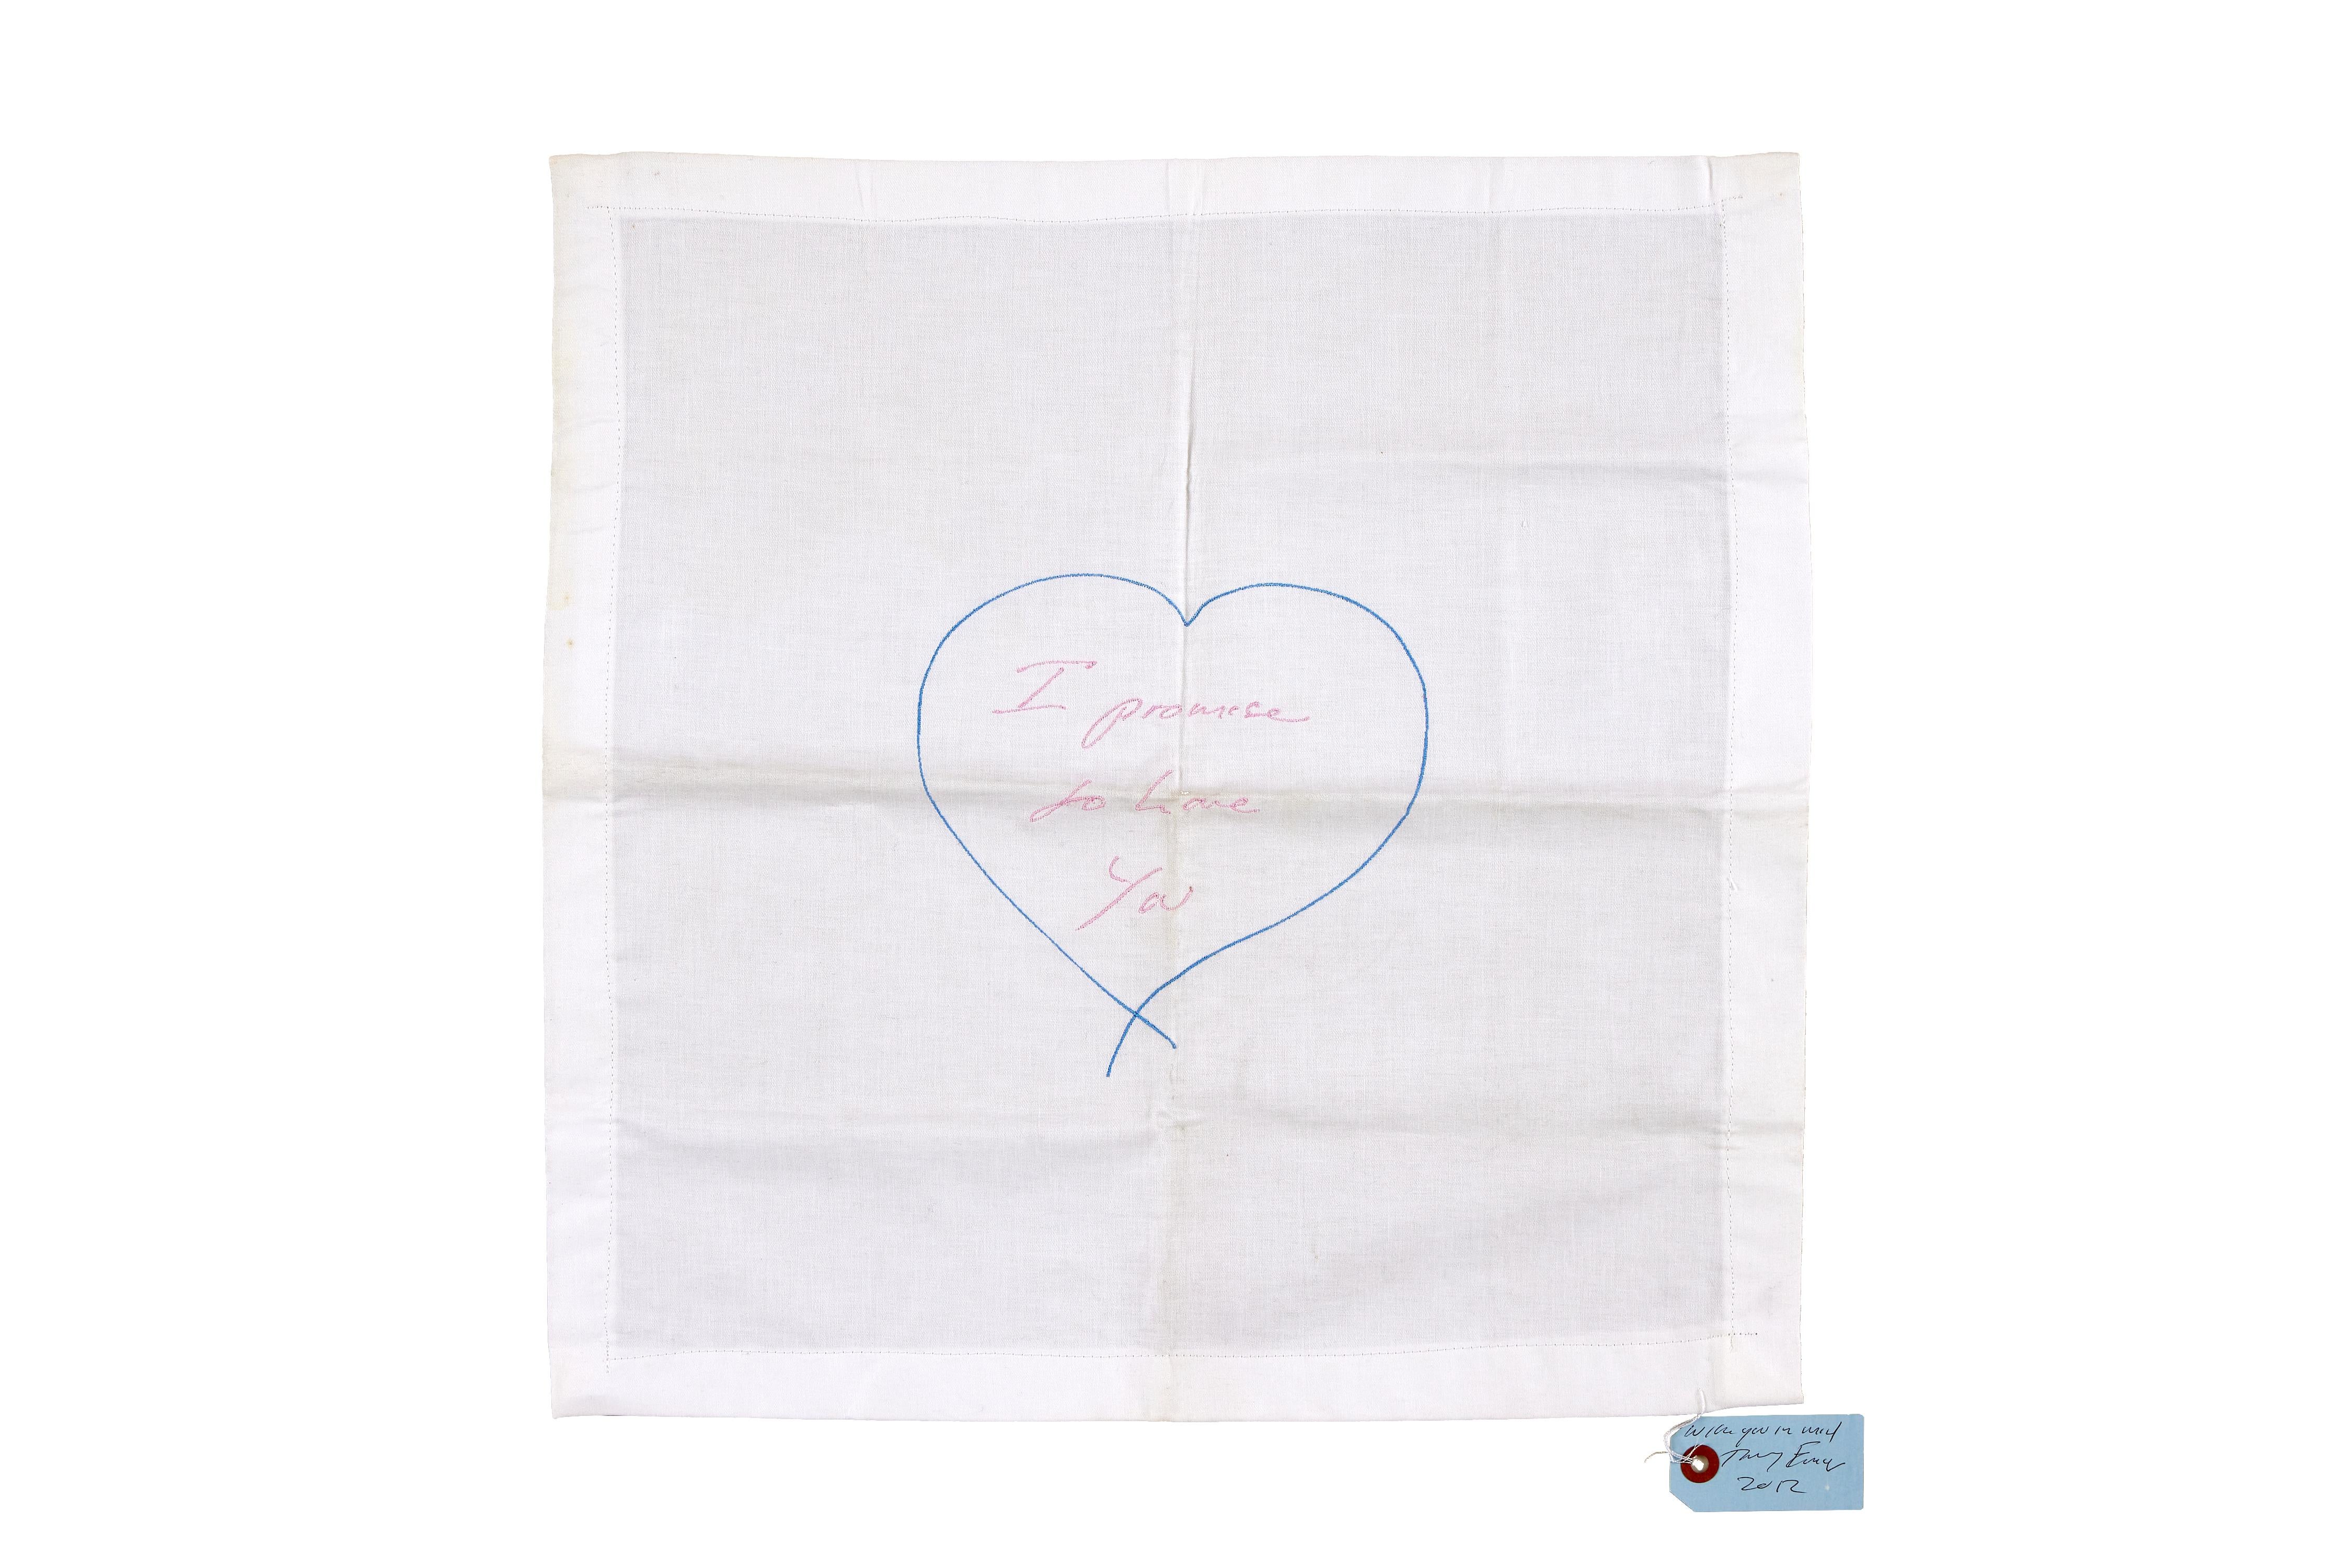 I Promise To Love You, 2012
Tracey Emin 

Embroidery, on linen napkin
Signed, dated and dedicated ‘With you in mind’
on the accompanying swing tag as issued
The edition size is believed to be only 50
Multiple: 41 × 41 cm (16.1 × 16.1 in)

This is